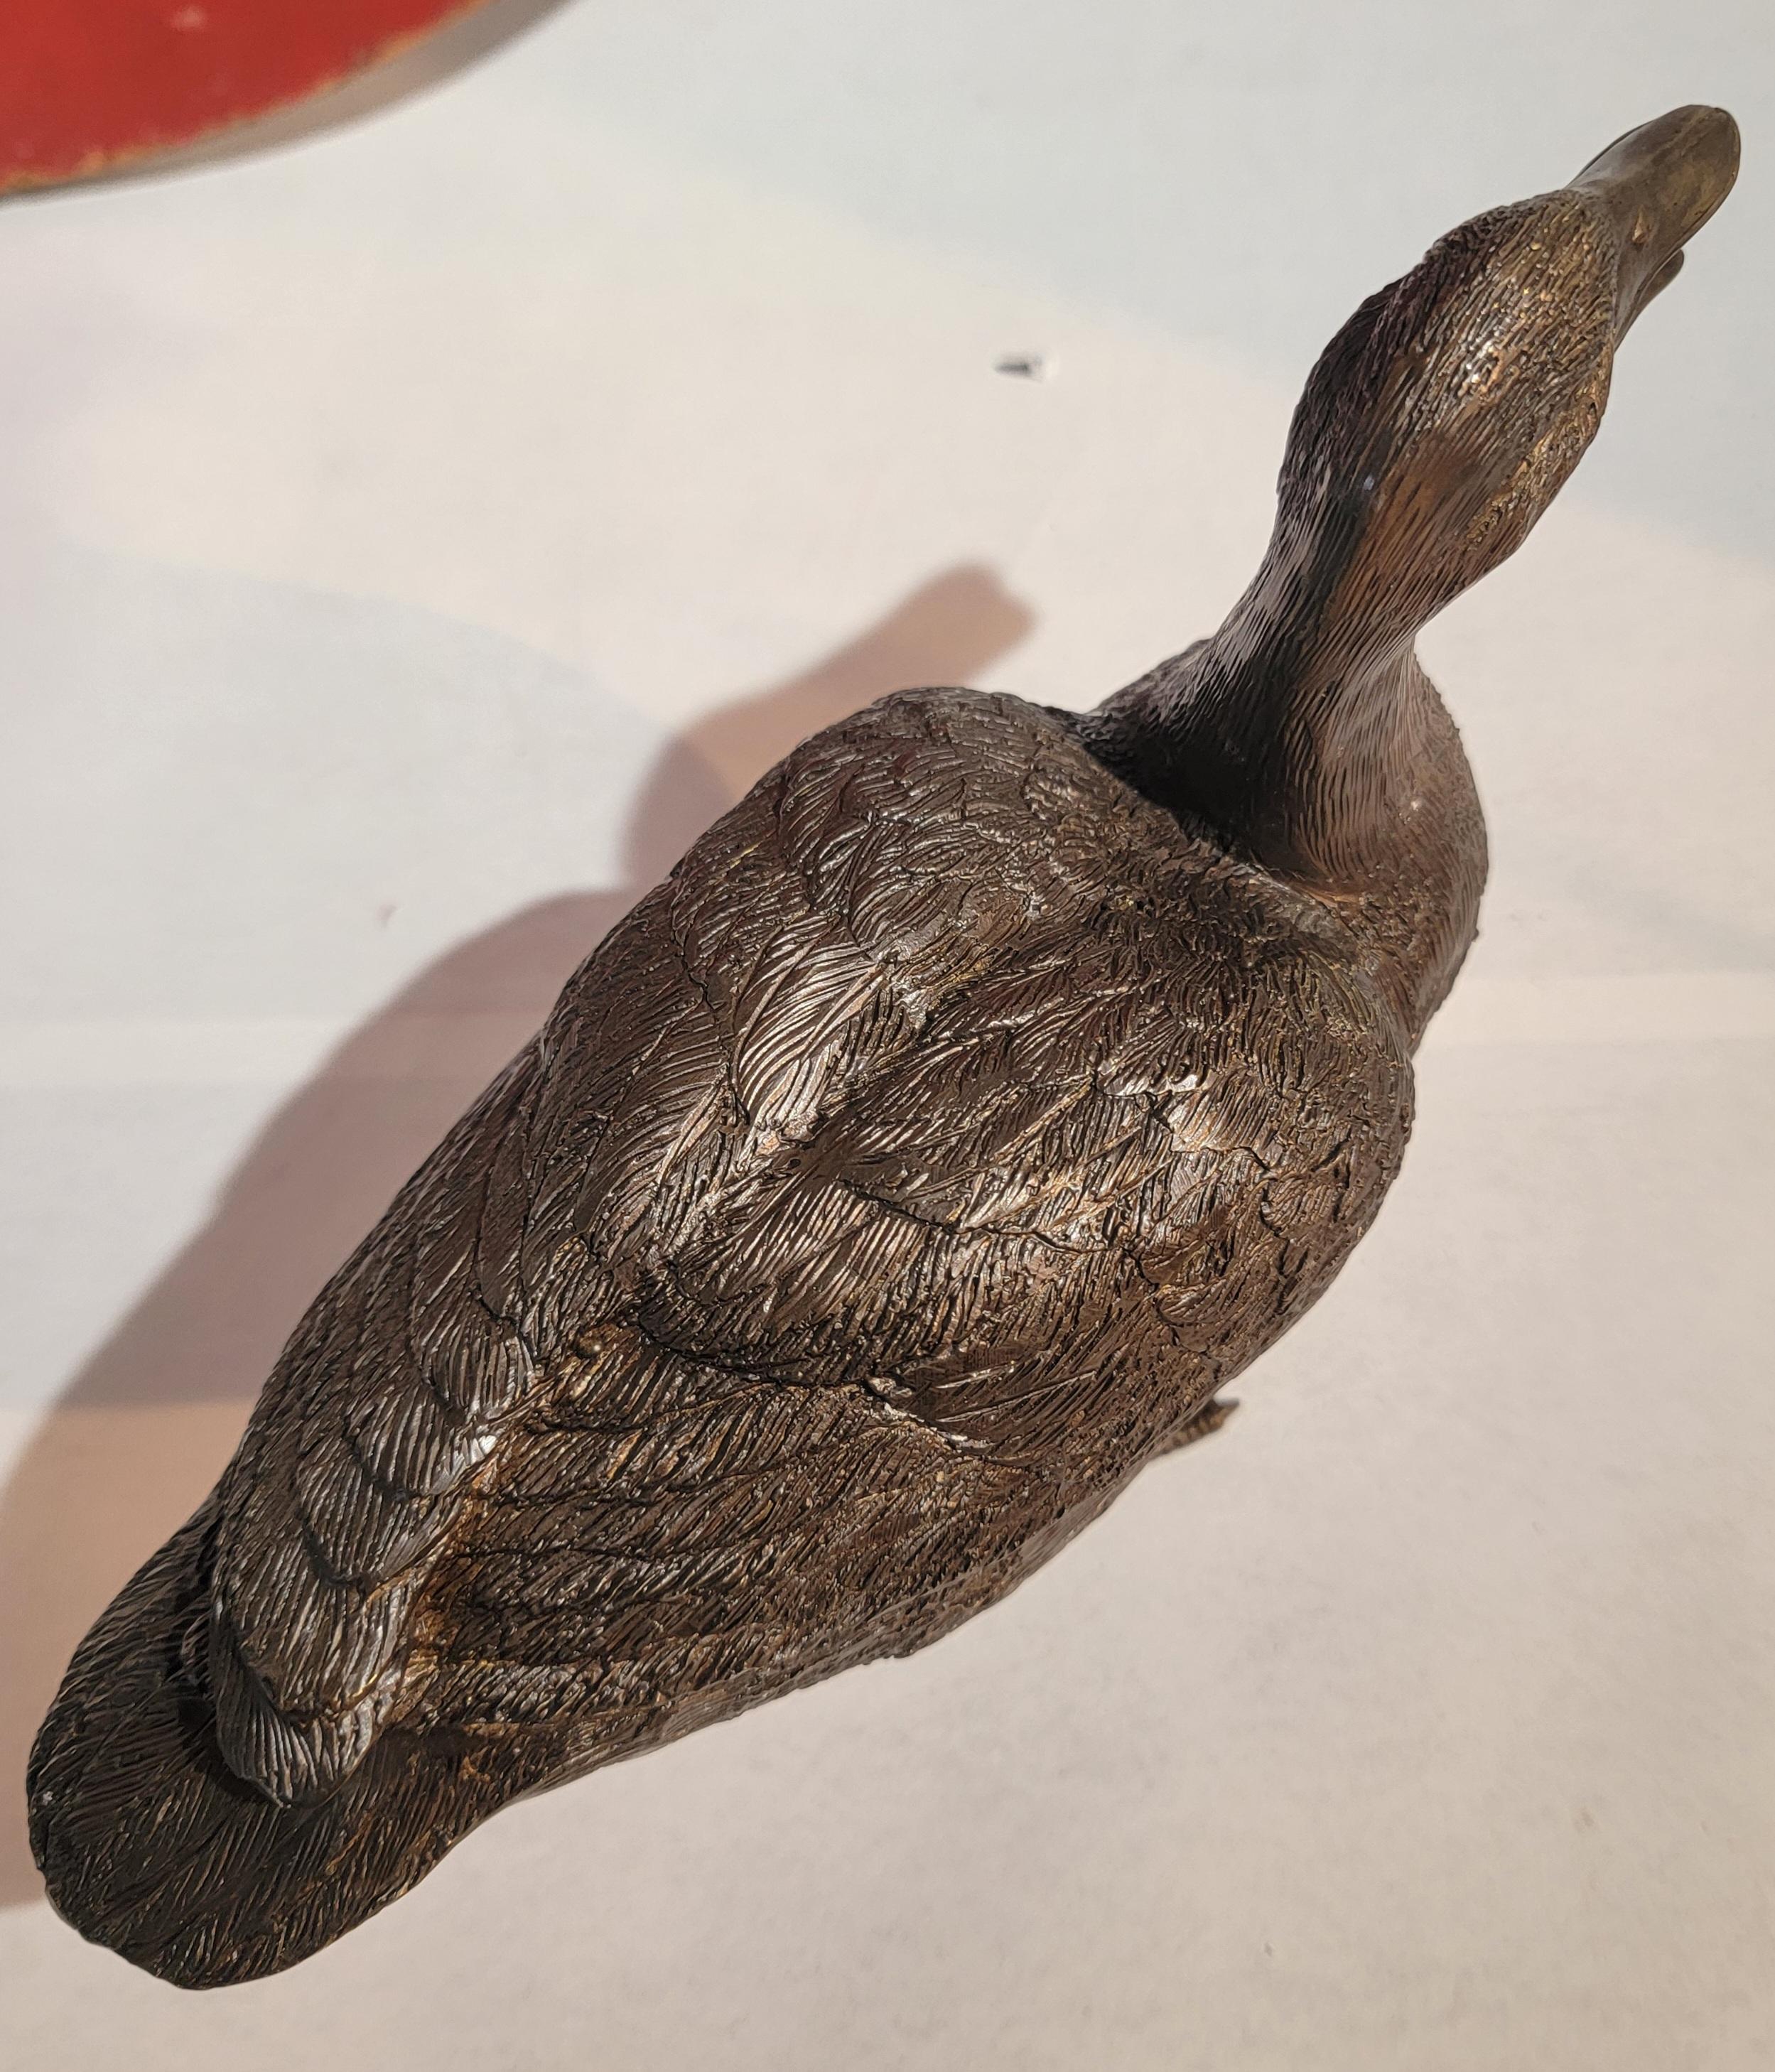 Great bronze design standing duck ornament. This ornament has great color and patina from age. The surface has great textures.